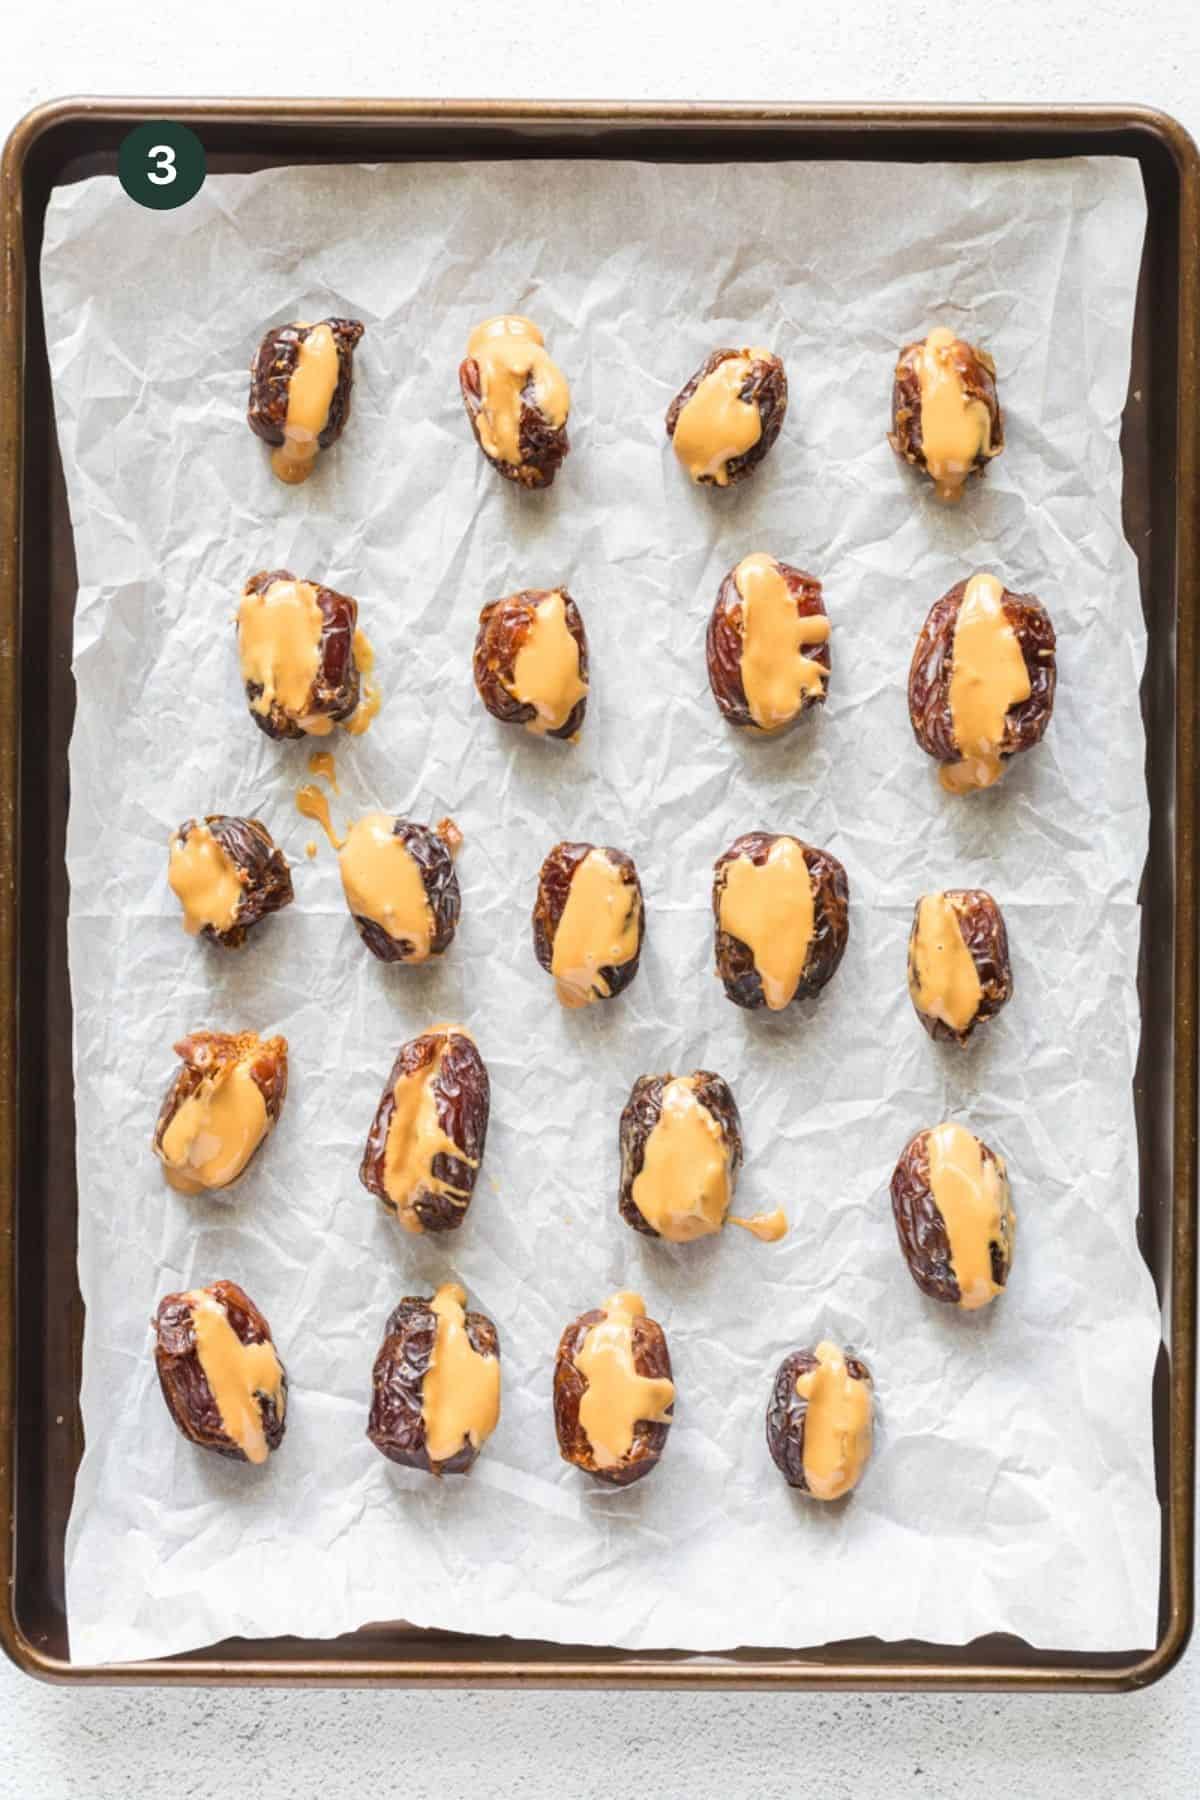 Prepped peanut butter filled dates on a baking sheet to freeze. 